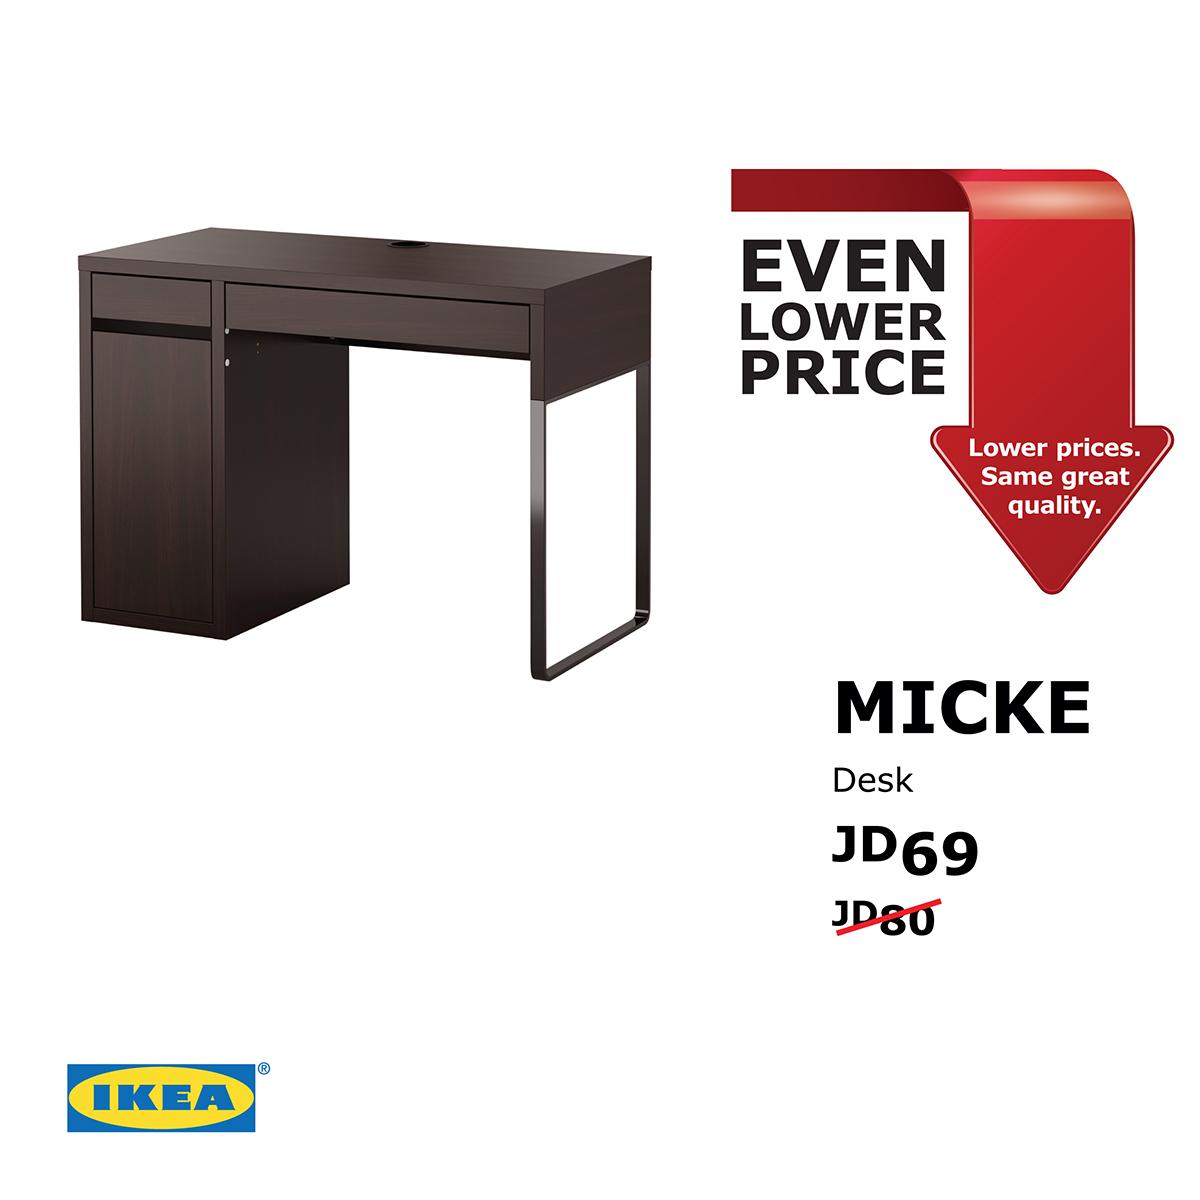 Ikea Jordan On Twitter The Micke Desk Has An Outlet At The Back